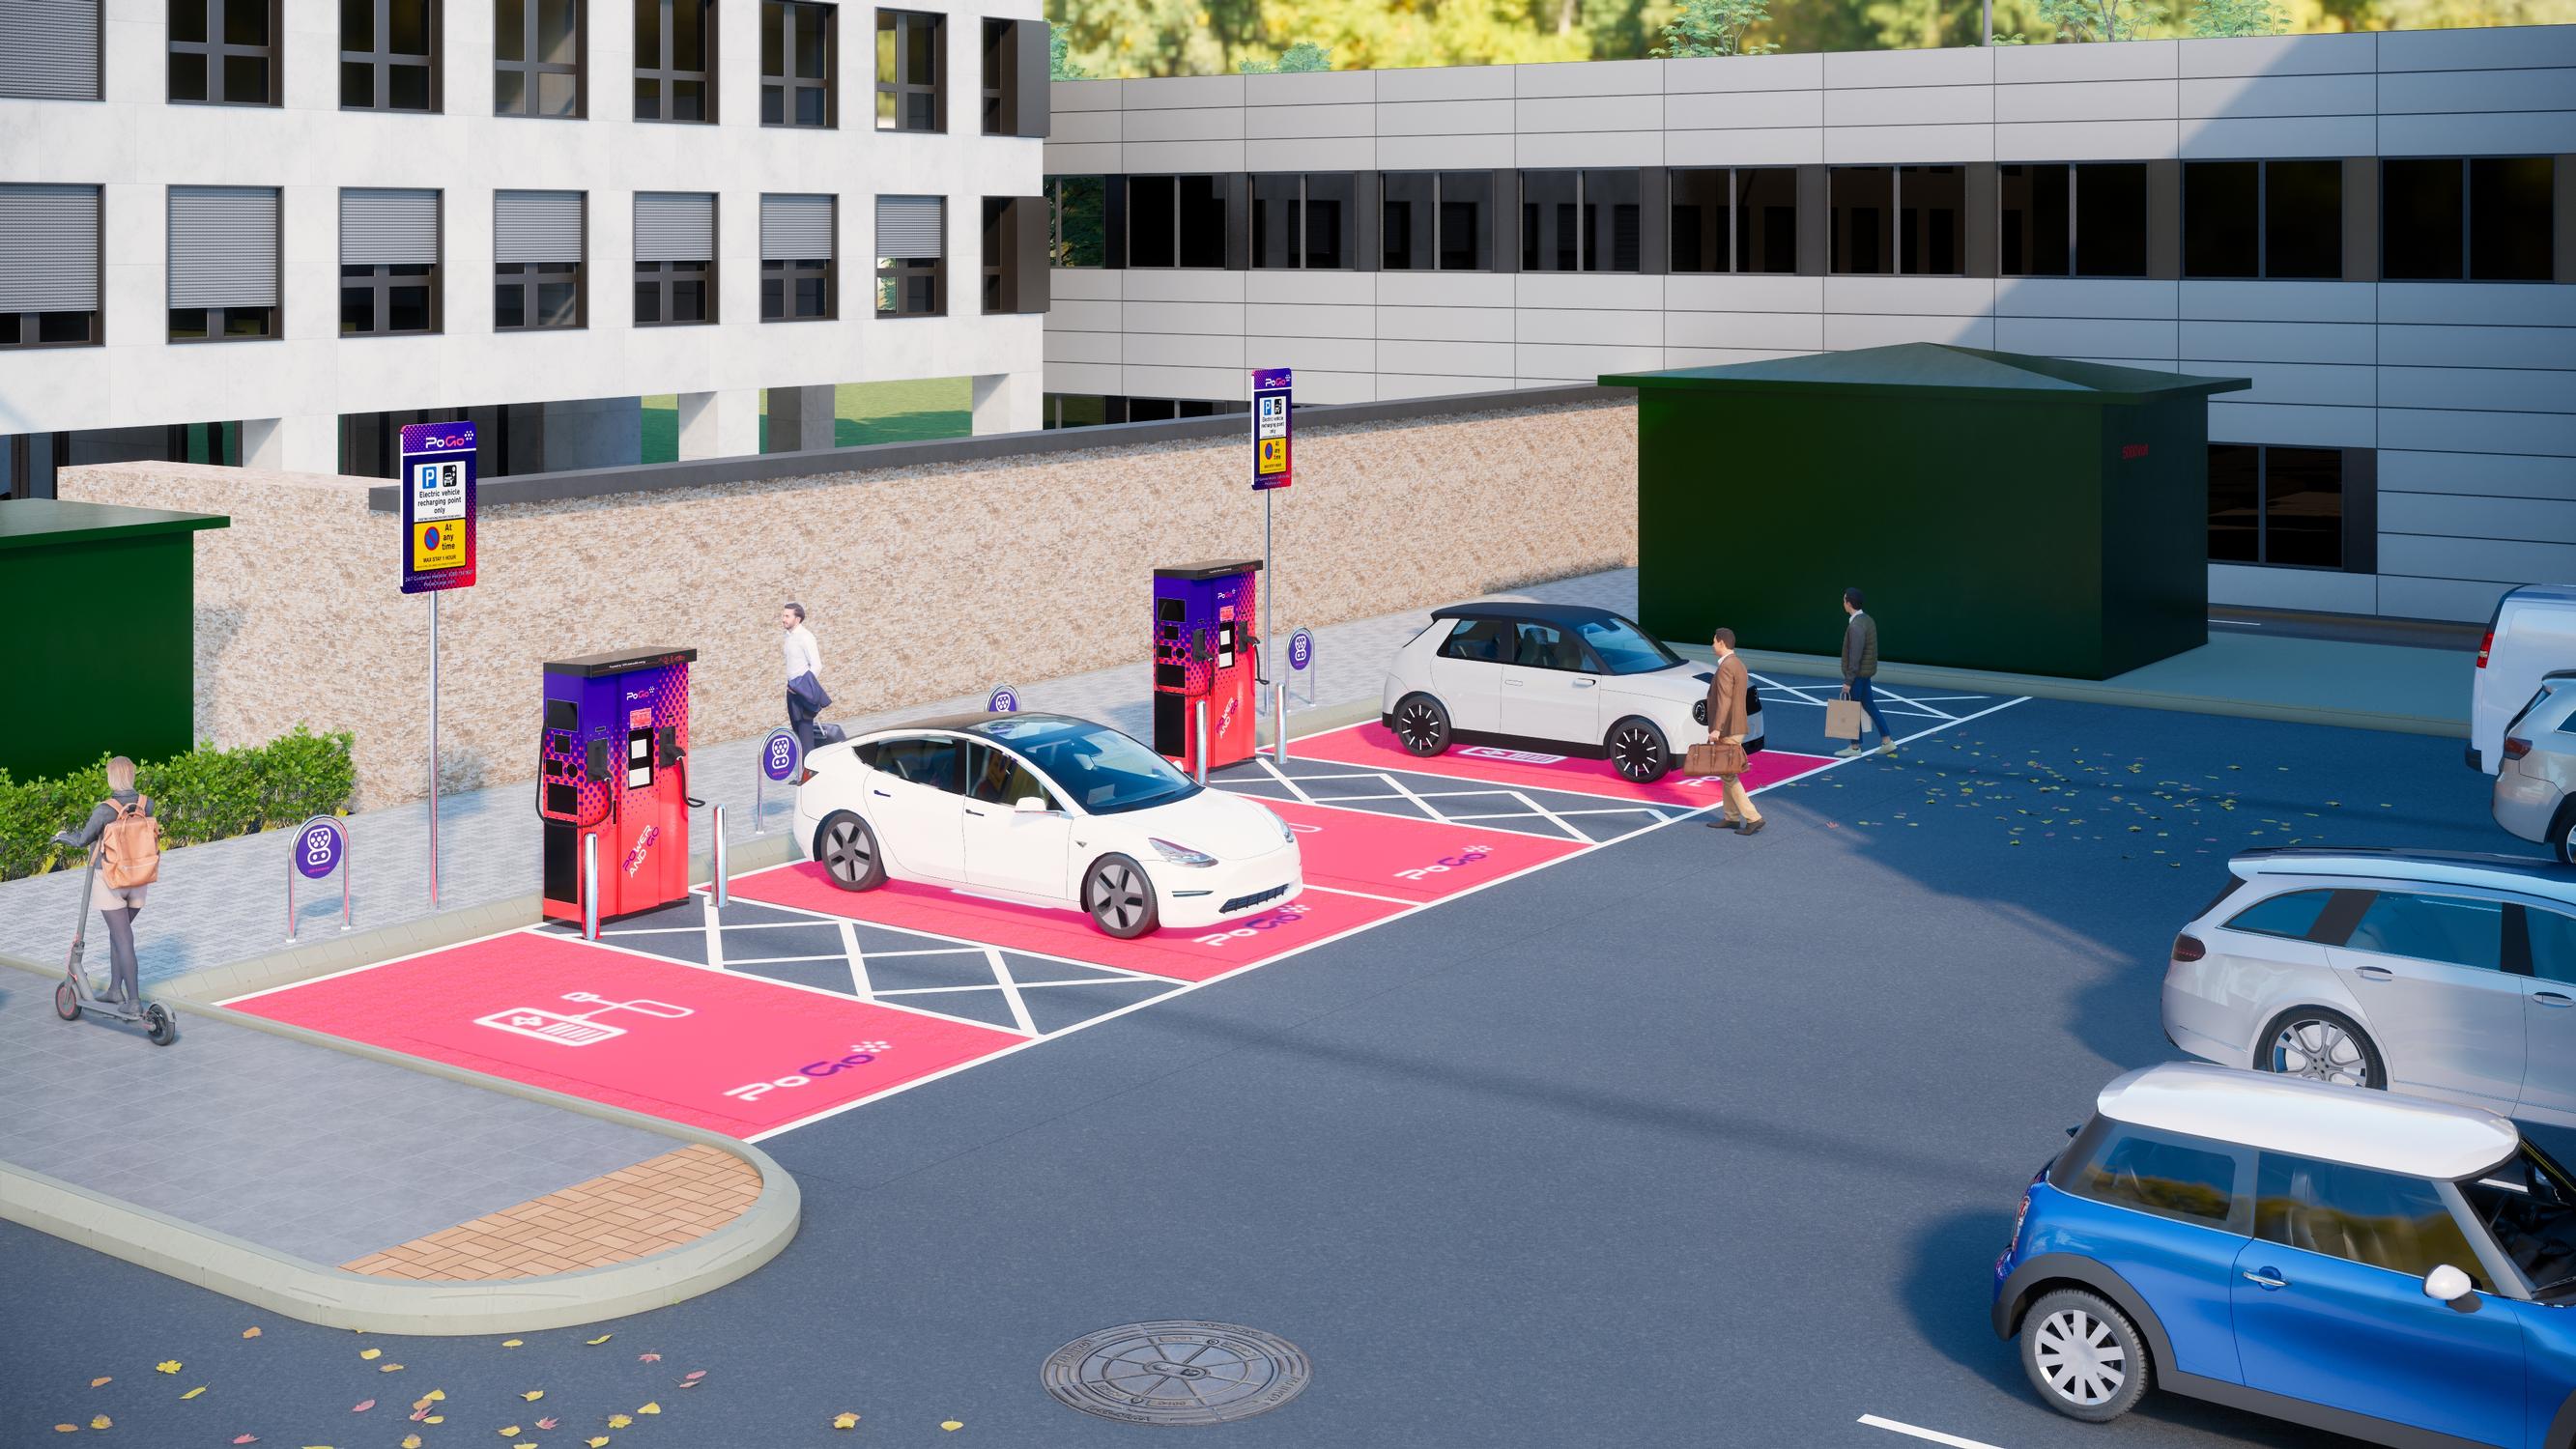 PoGo charging locations will be positioned near public amenities, coffee shops and food outlets